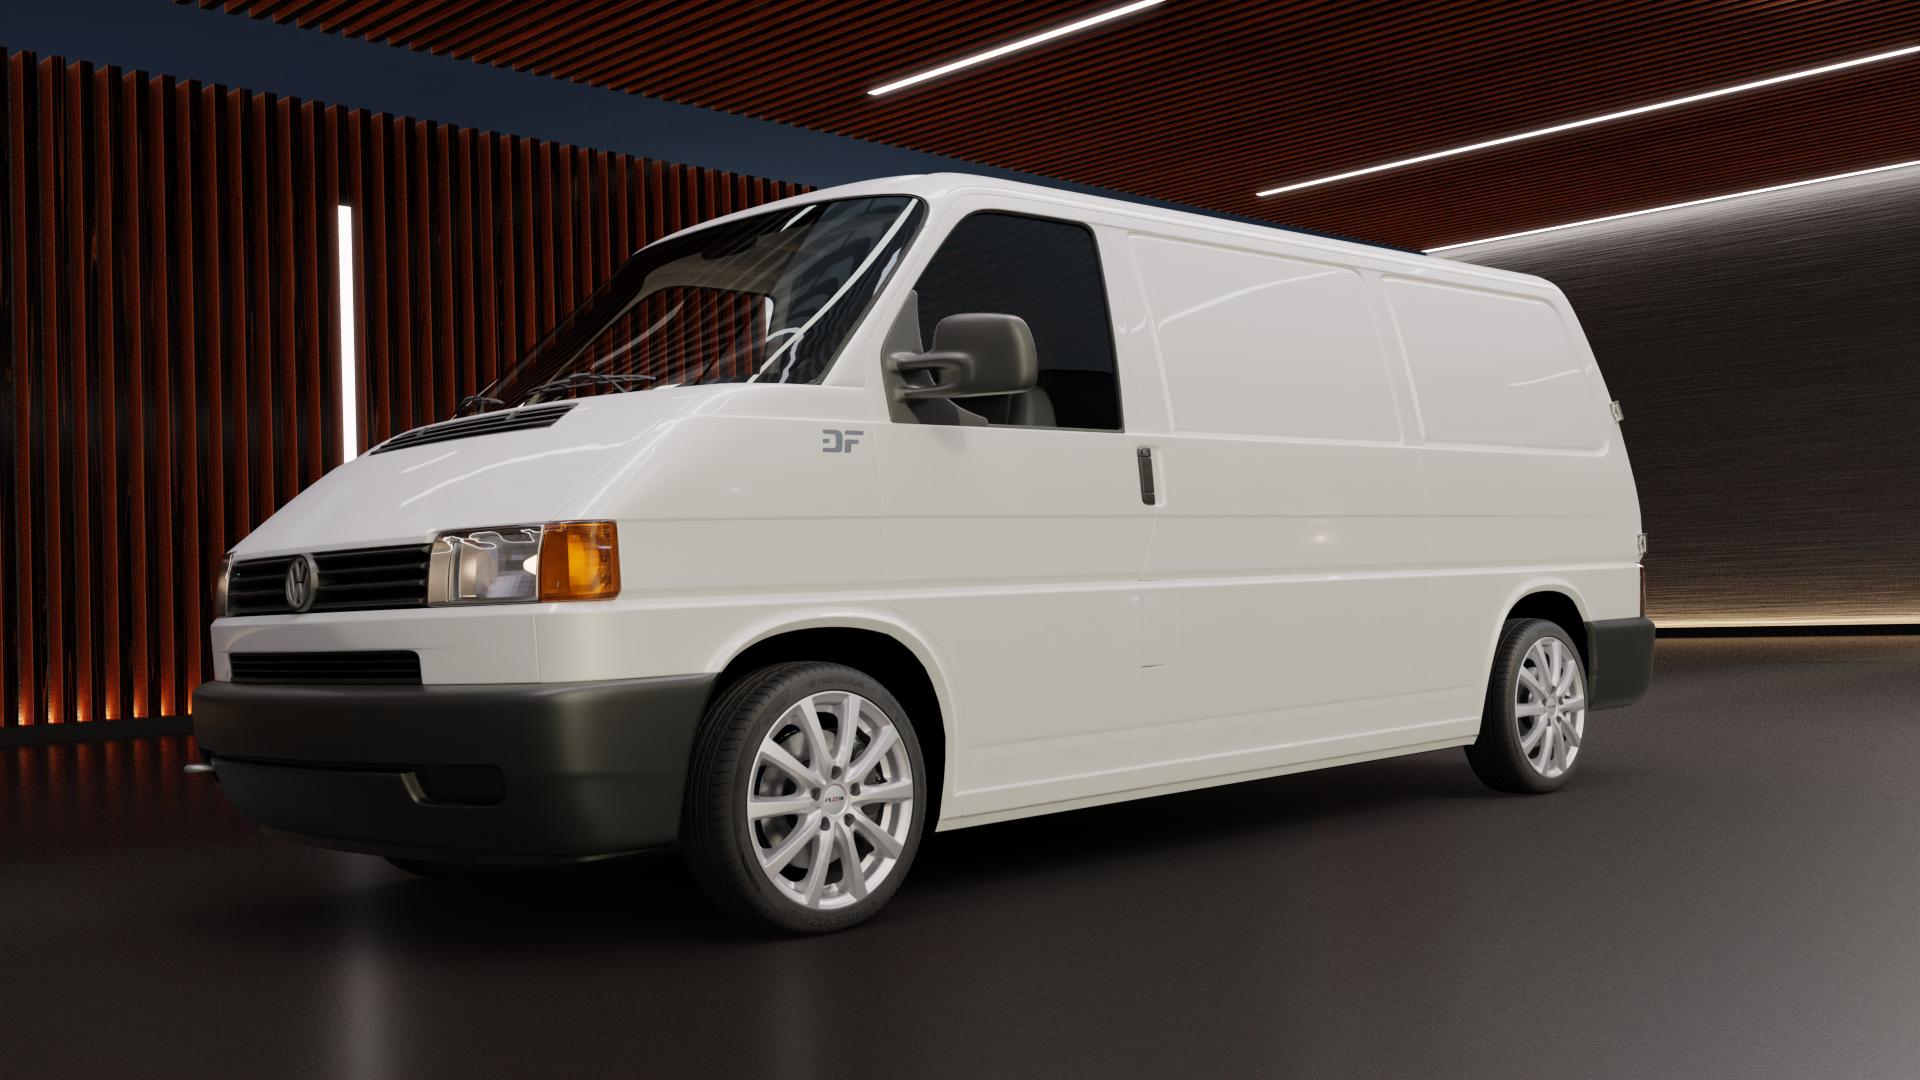 Volkswagen (VW) T4 Transporter 2,5l TDI 65kW (88 hp) Wheels and Tyre  Packages | velonity.com